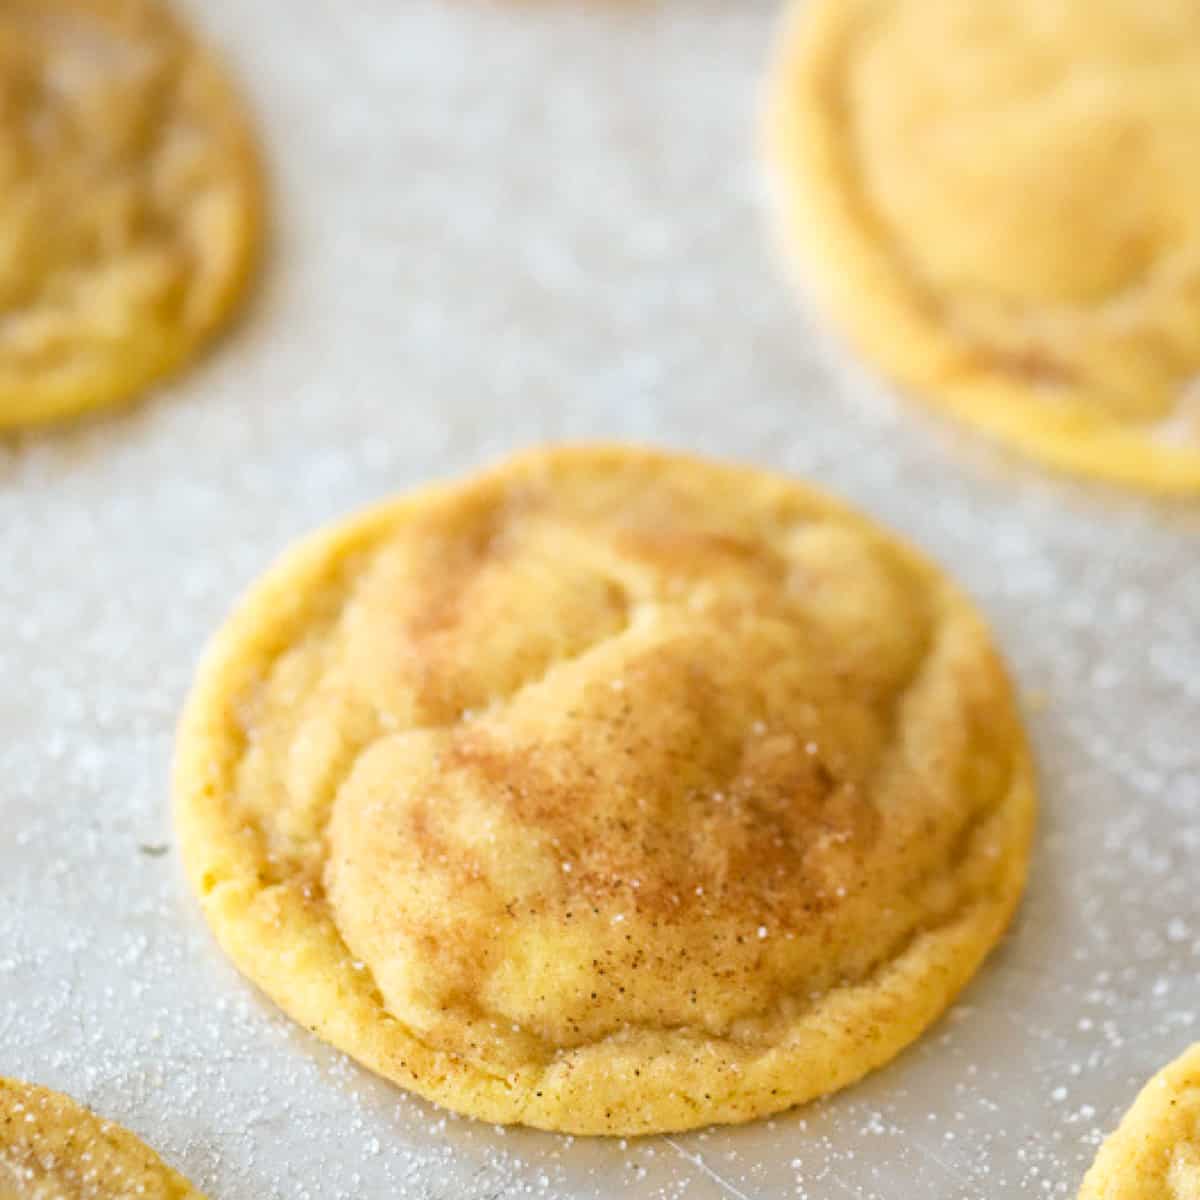 Soft and chewy einkorn Snickerdoodles.